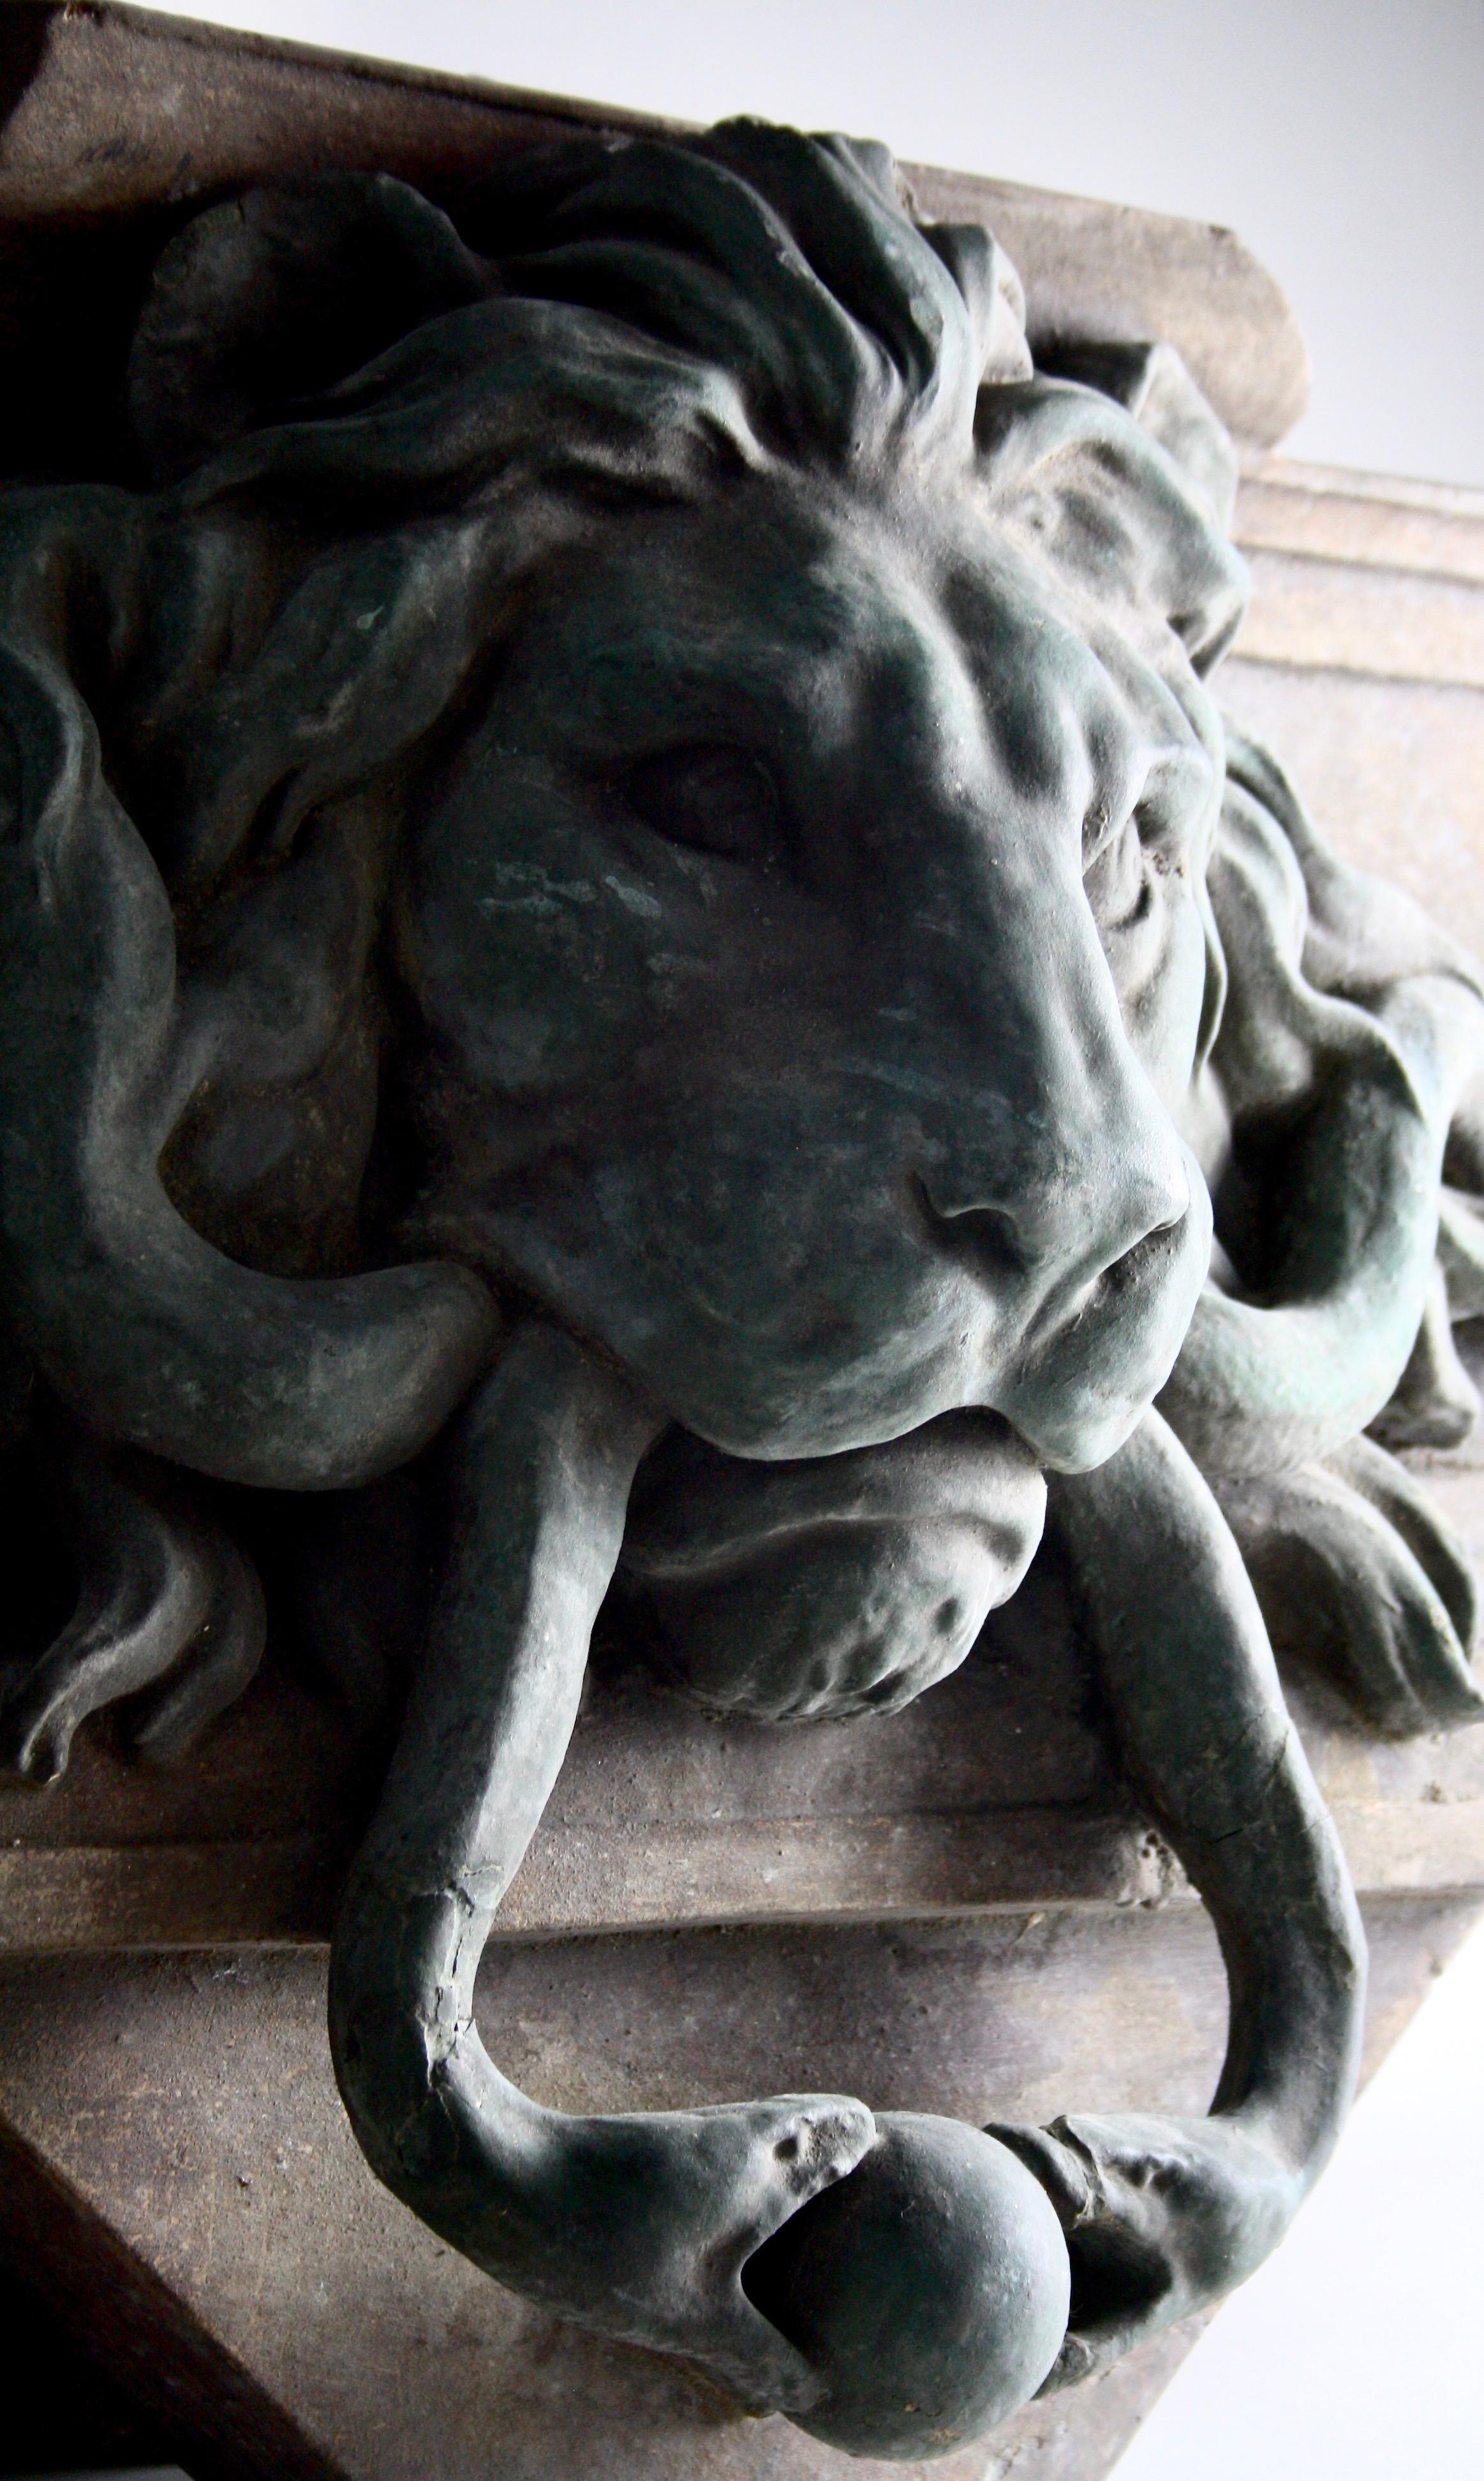 Modelled as a lion mask door knocker with entwined serpents, centred on a rectangular moulded architrave. This architectural element was designed to sit above the inner entrance doorway of a large house.